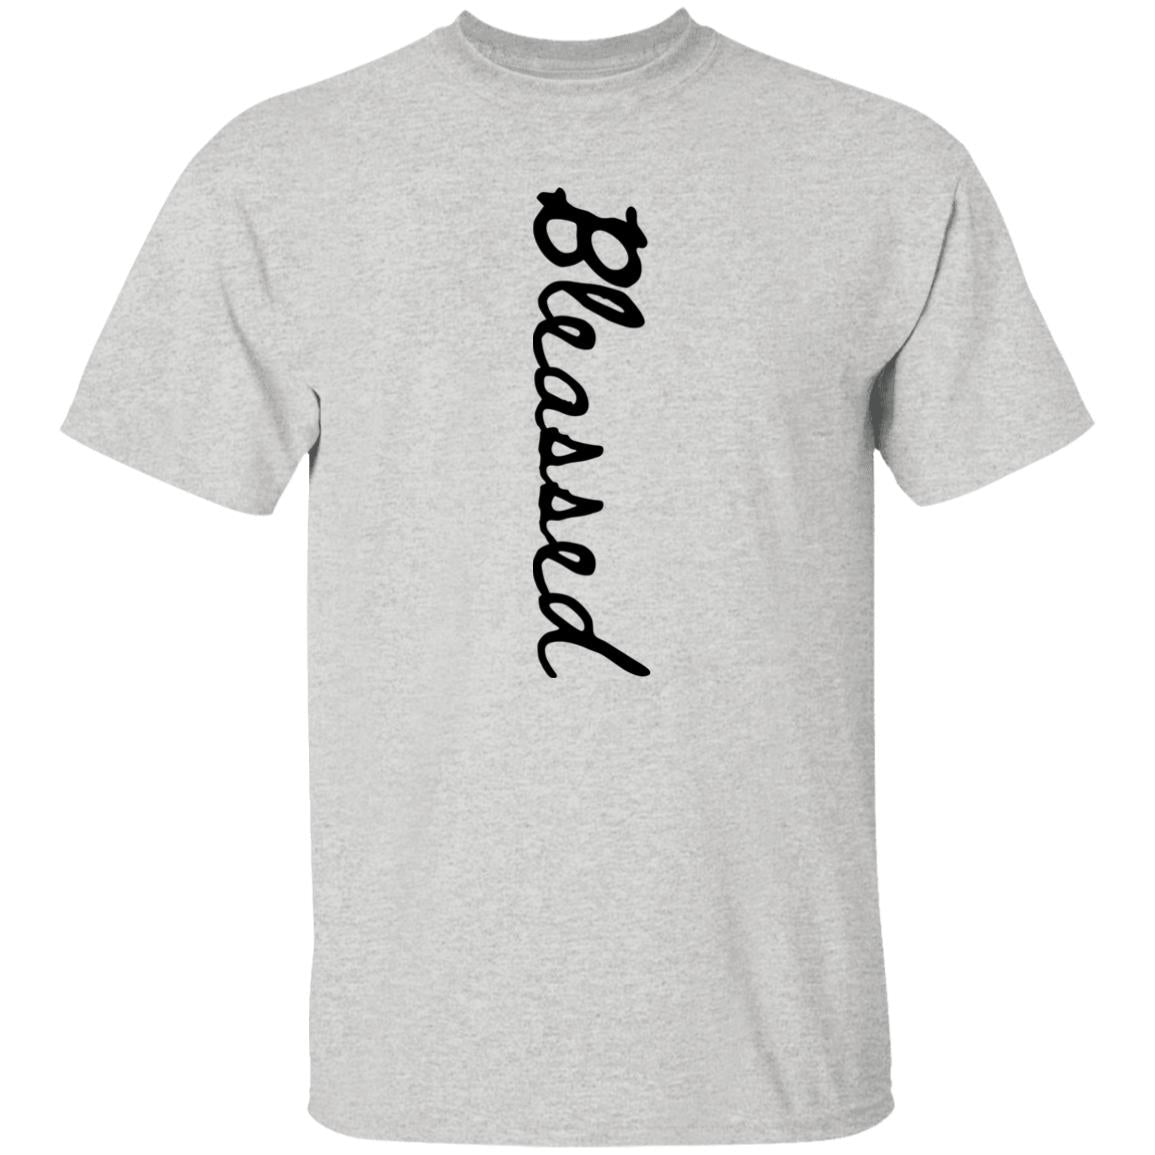 Blessed - Tee Shirt